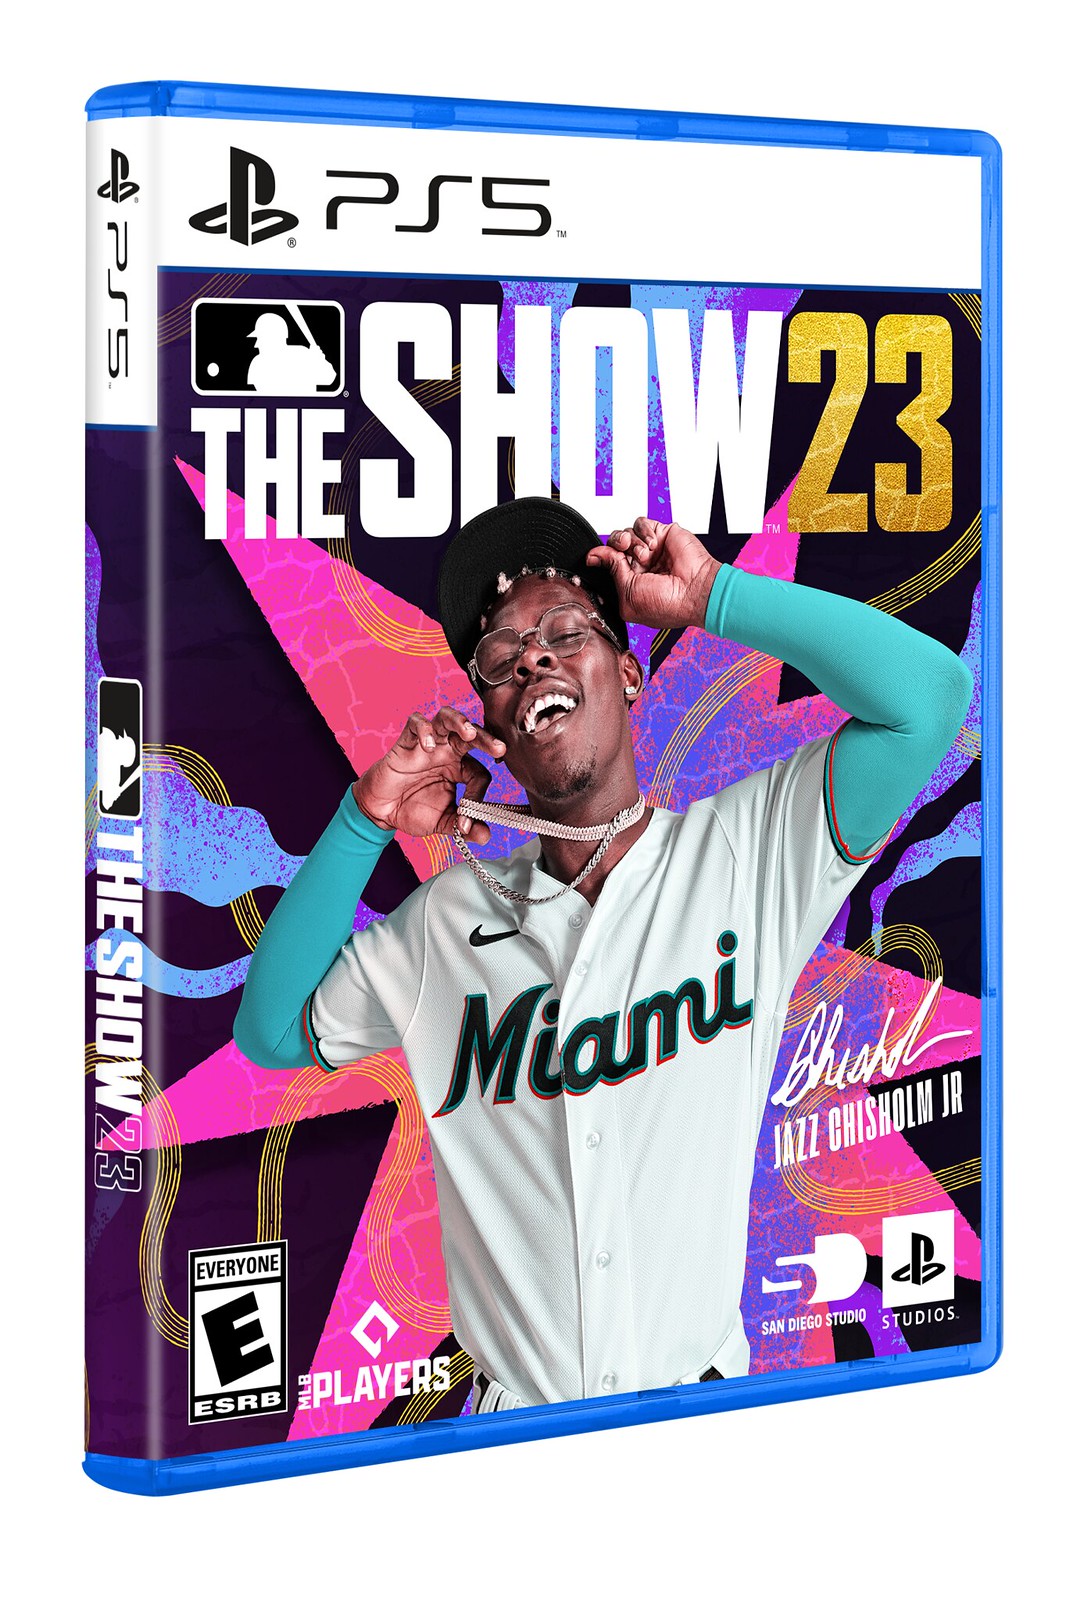 Jazz Chisholm Jr. is the cover athlete of MLB The Show 23